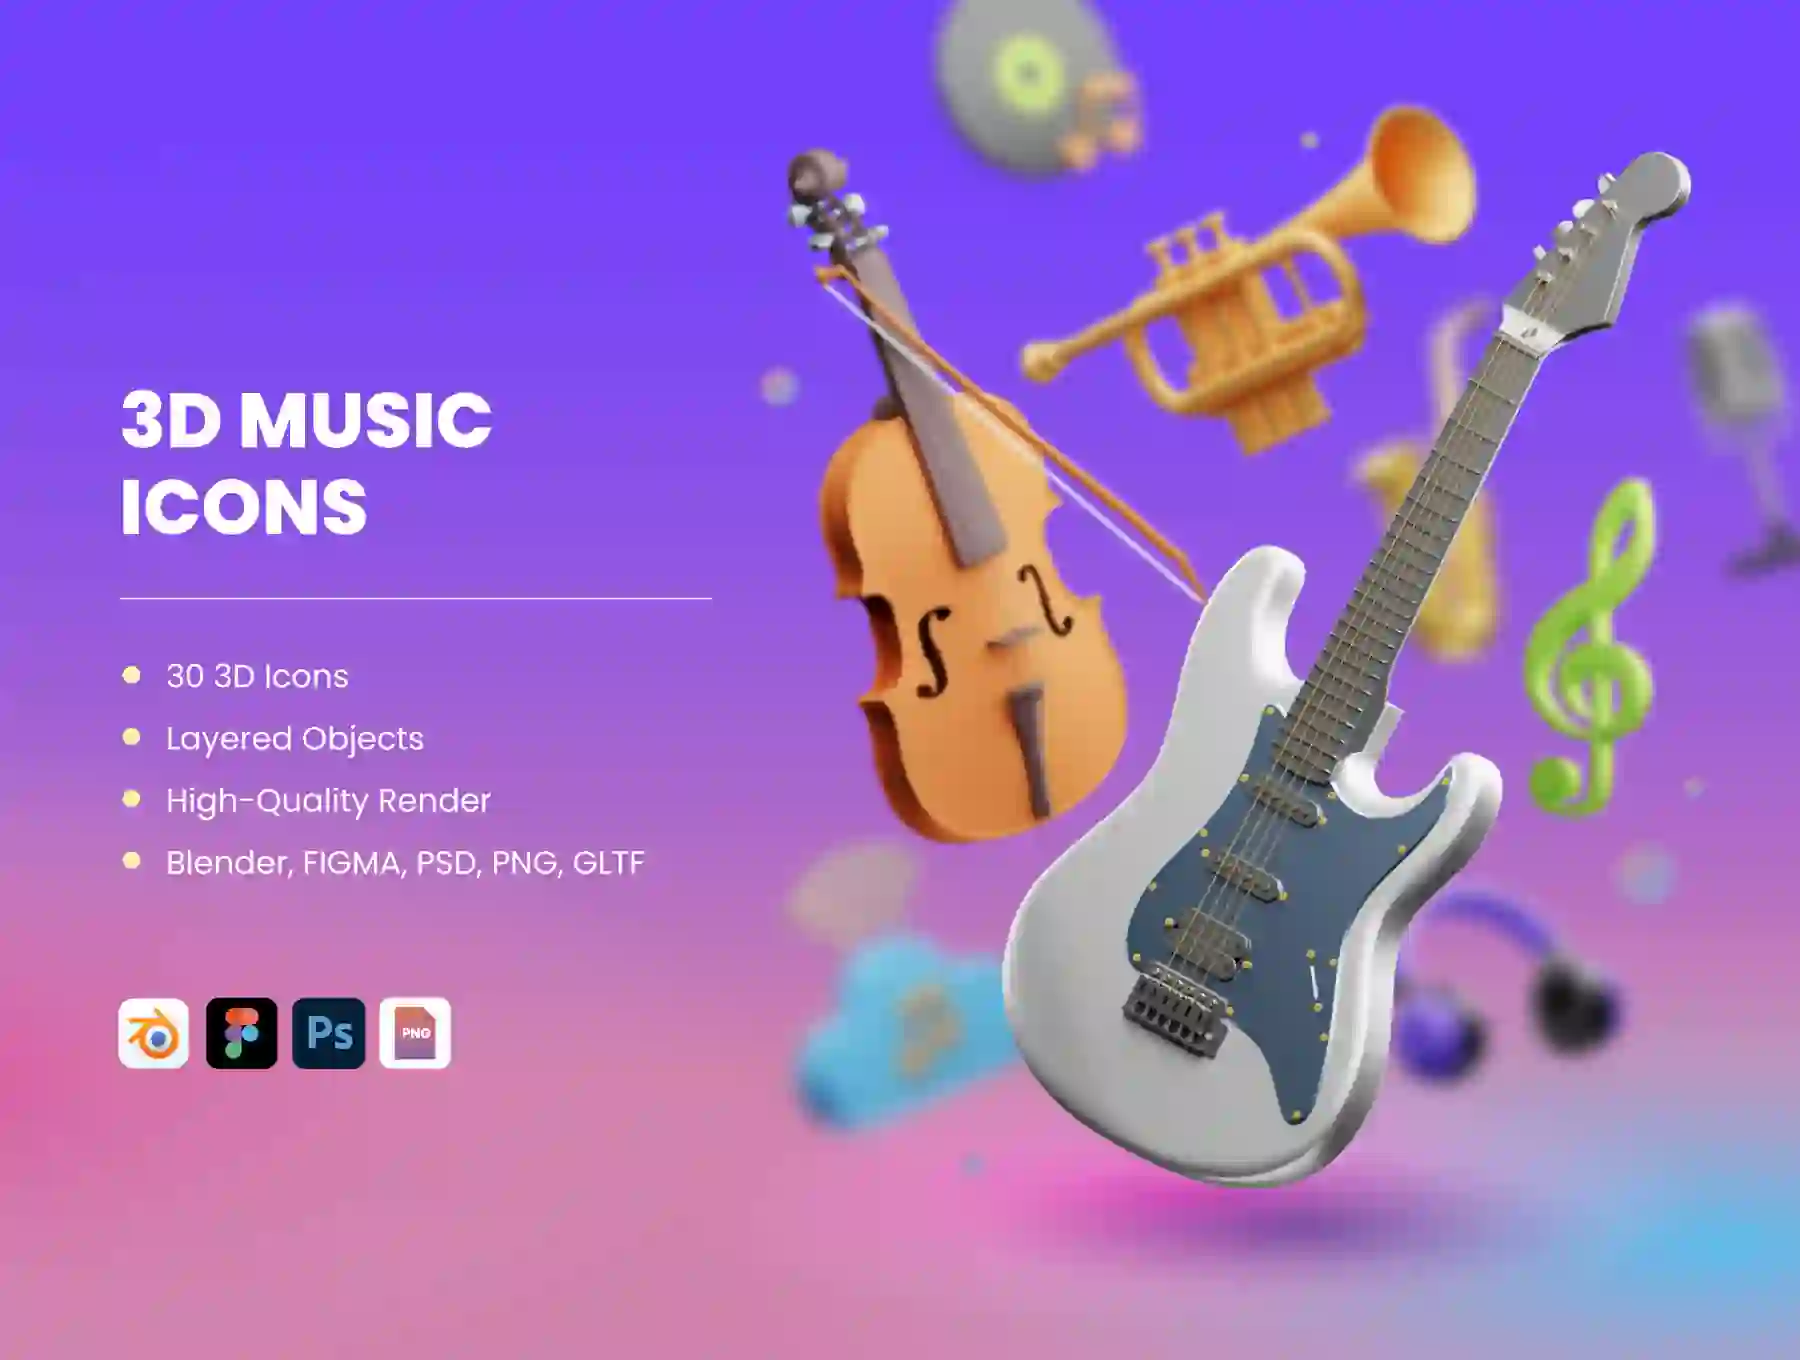 3D Musical Elements Icons